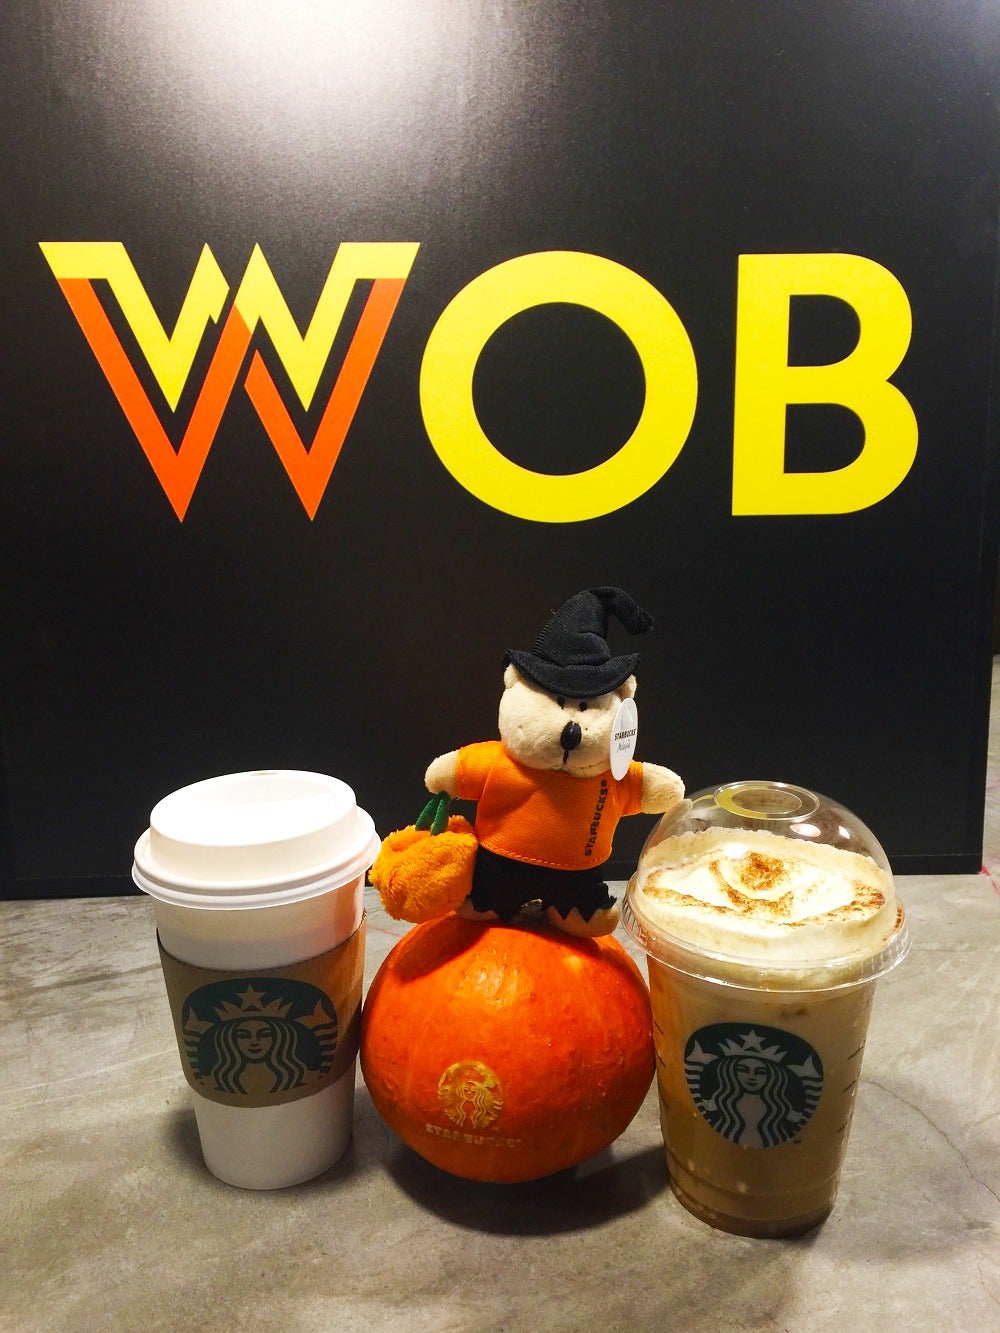 Starbucks Malaysia Will Finally Be Launching Pumpkin Spice Latte on 15 Oct & Here's What It Tastes Like! - WORLD OF BUZZ 5